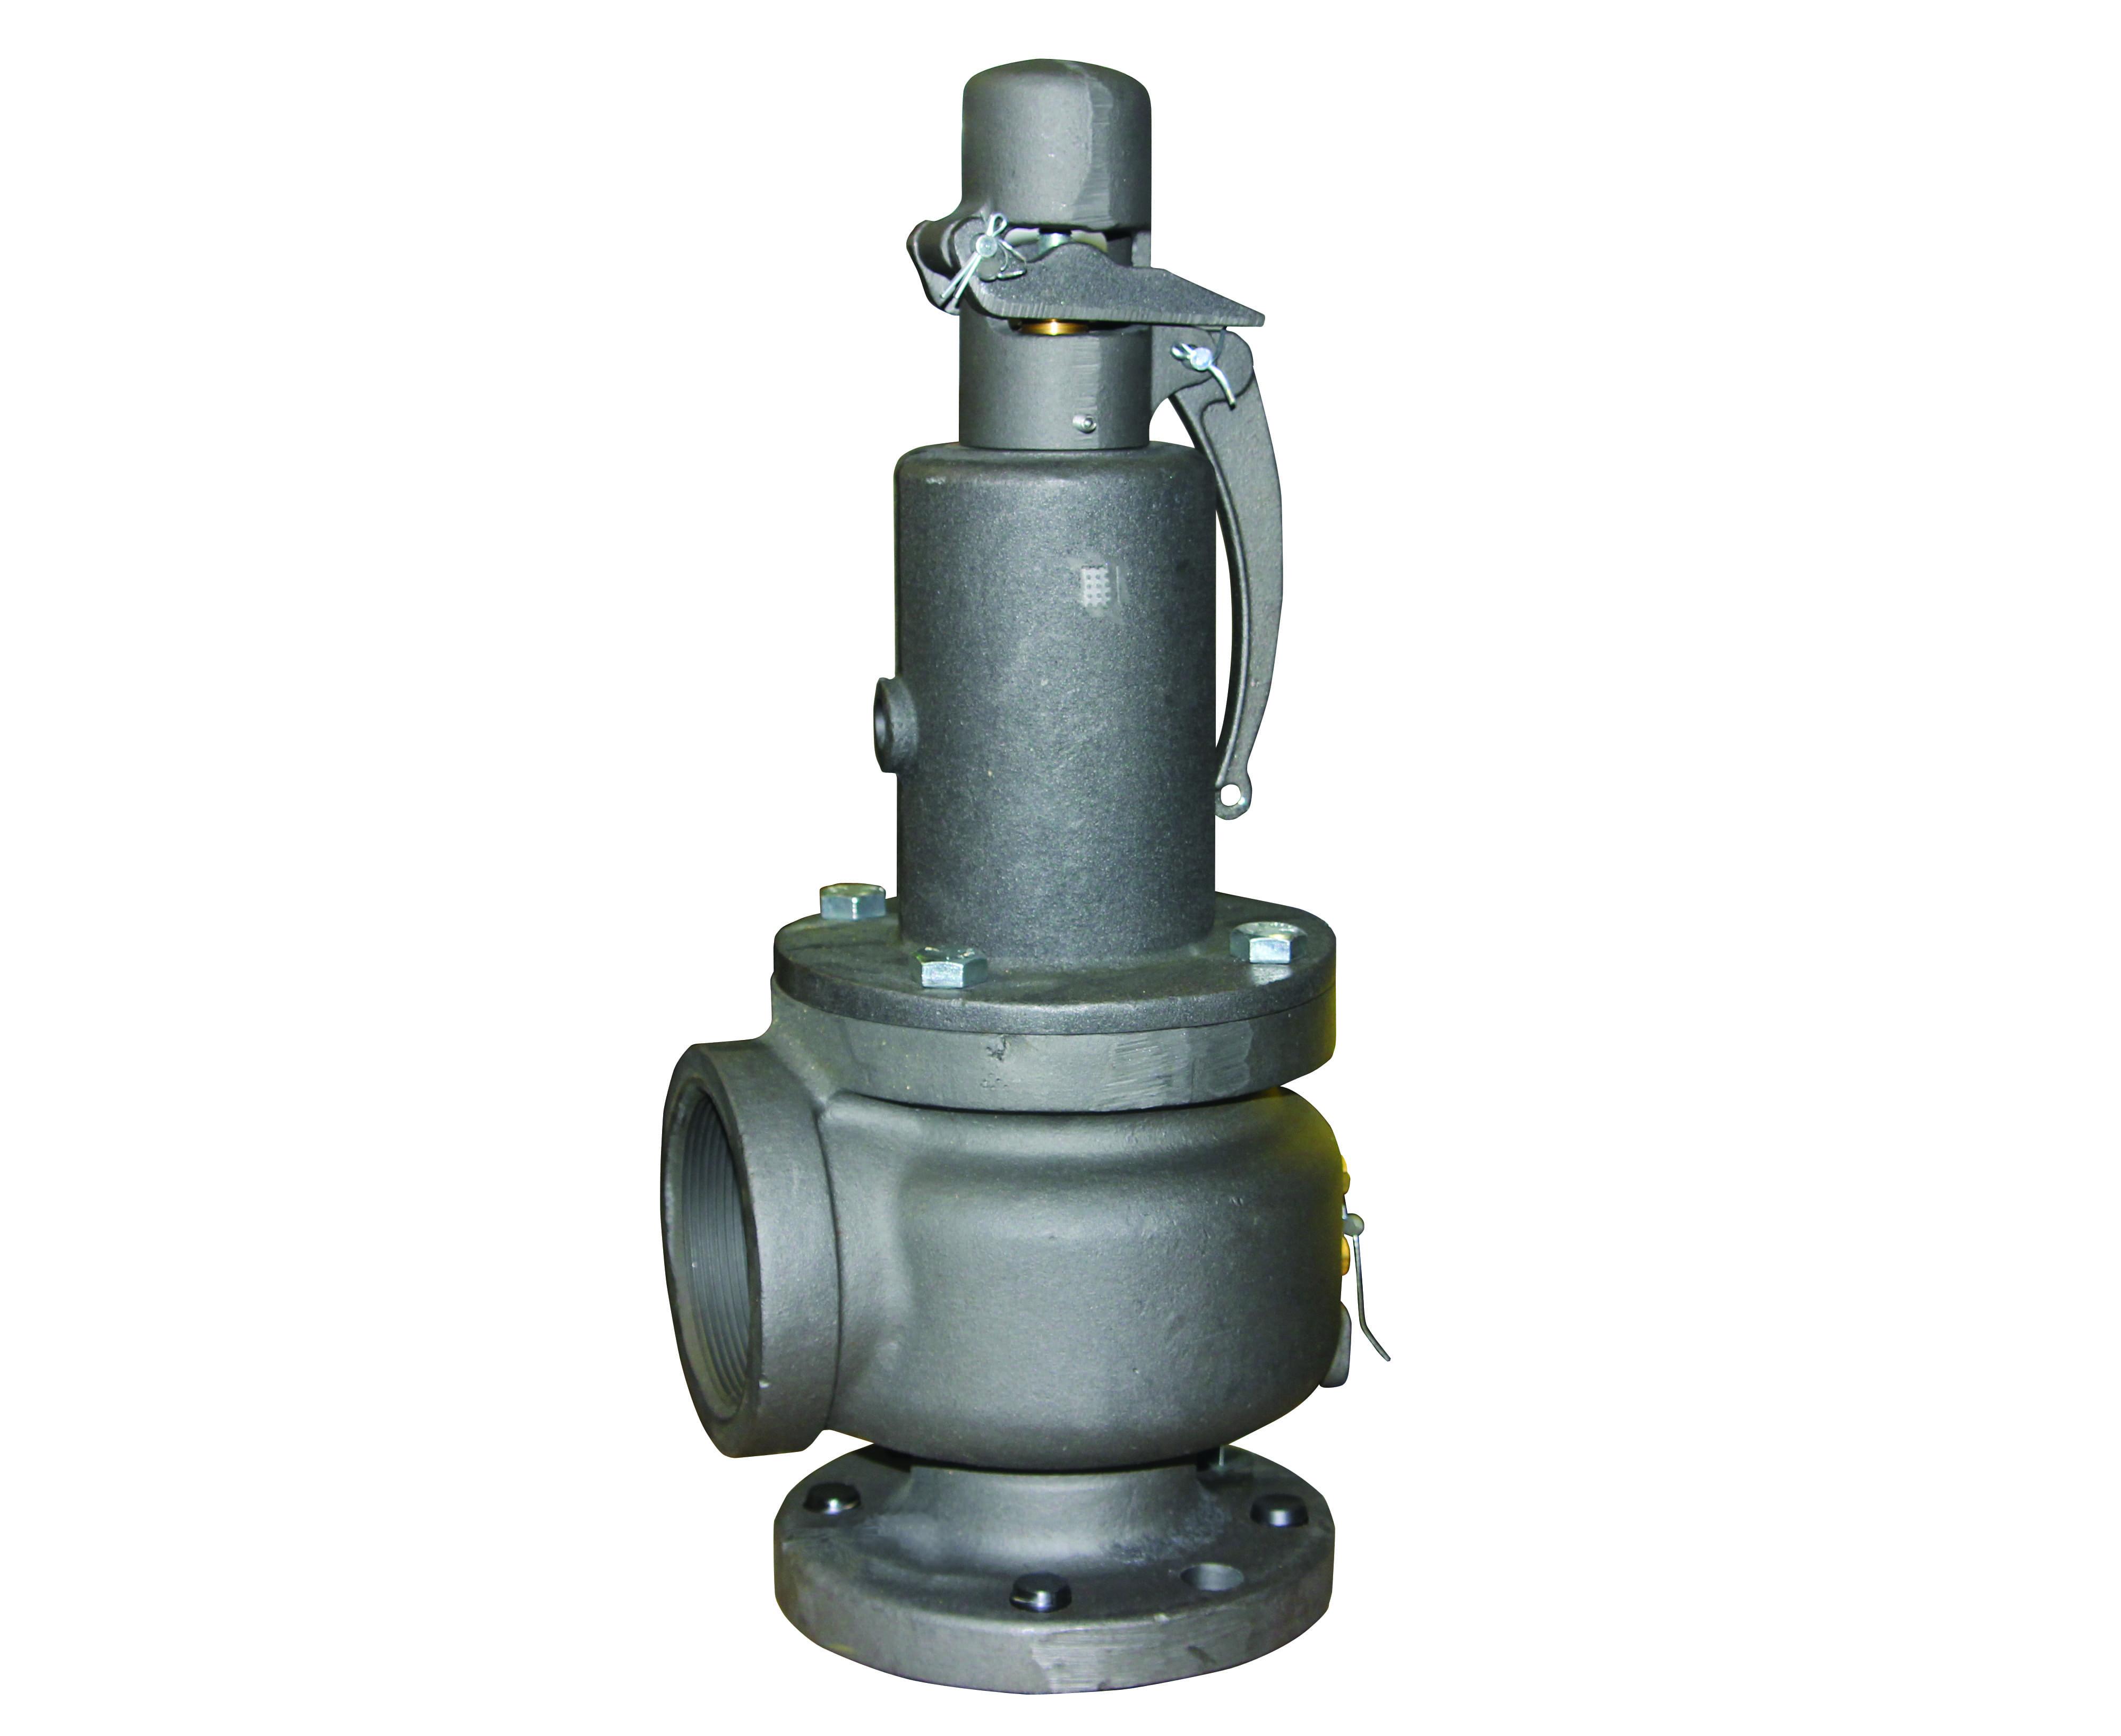 Preview image for Apollo ASME Section I Steam Cast Iron Safety Relief Valve, 3" X 4" (Flange x FNPT)